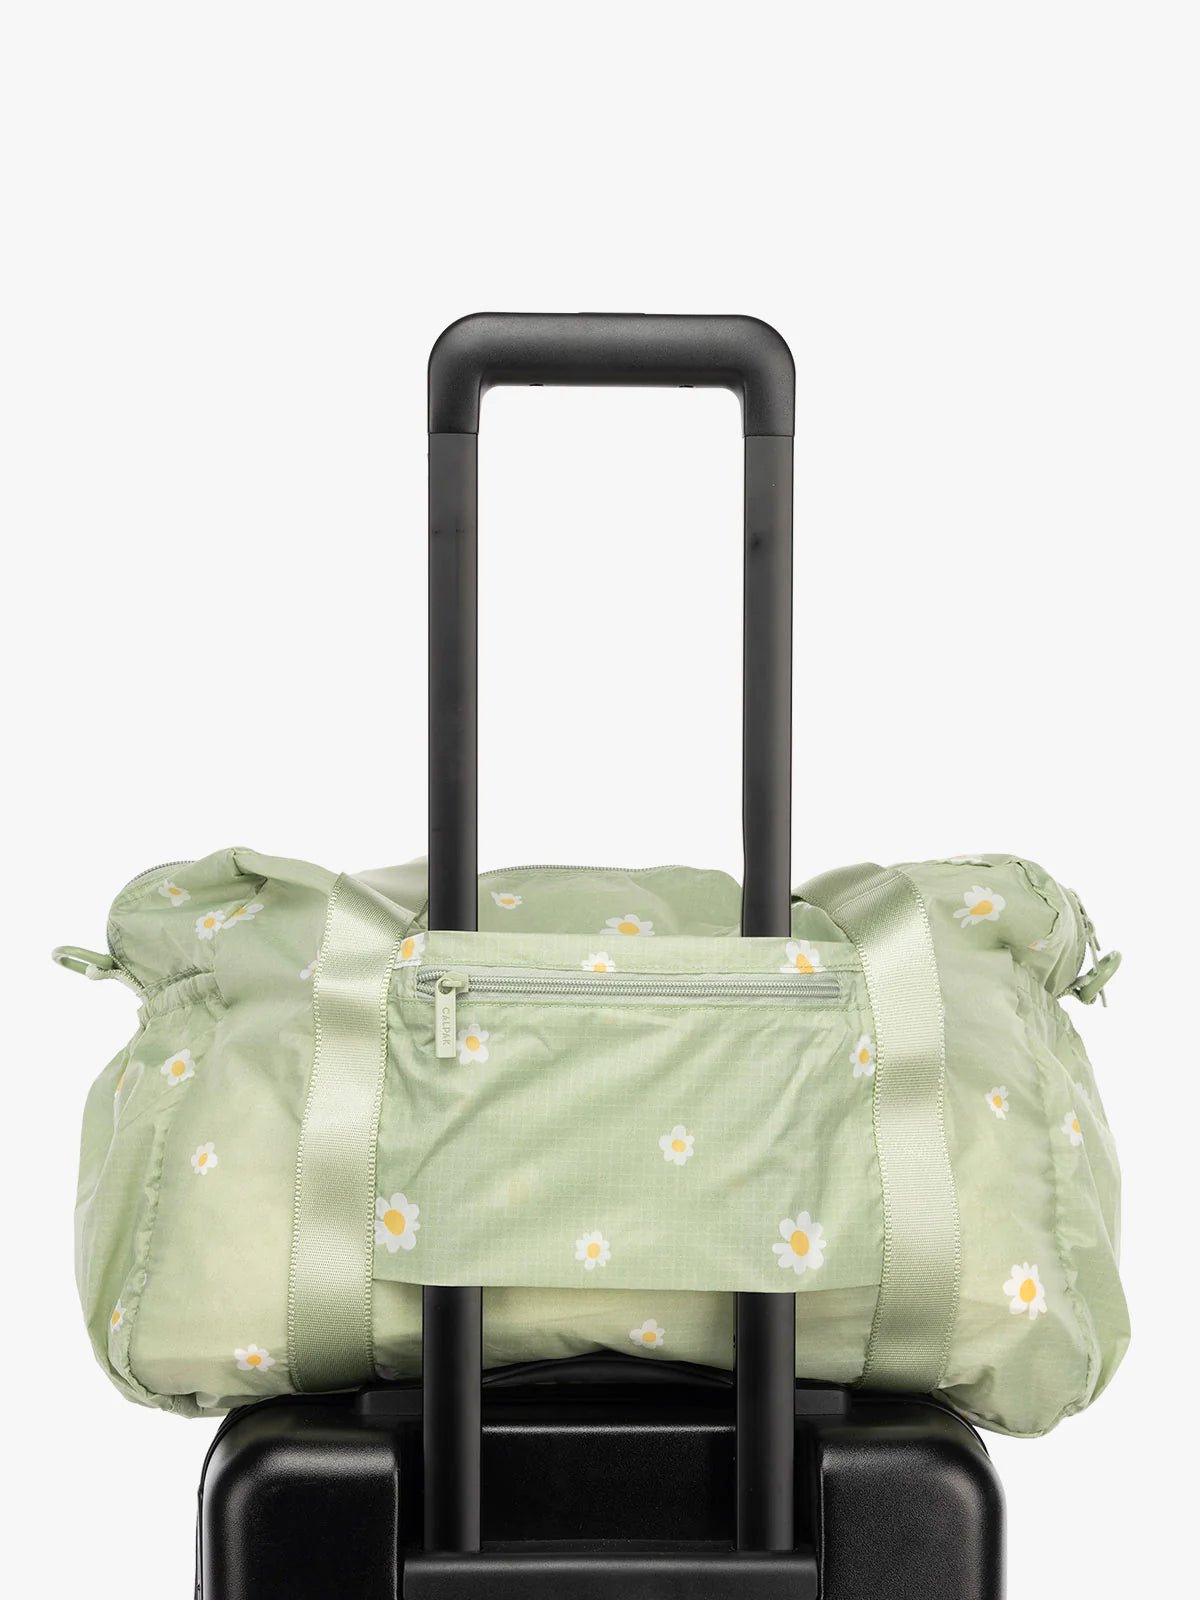 Daisy compakt duffel bag part of compakt duo with trolley luggage sleeve